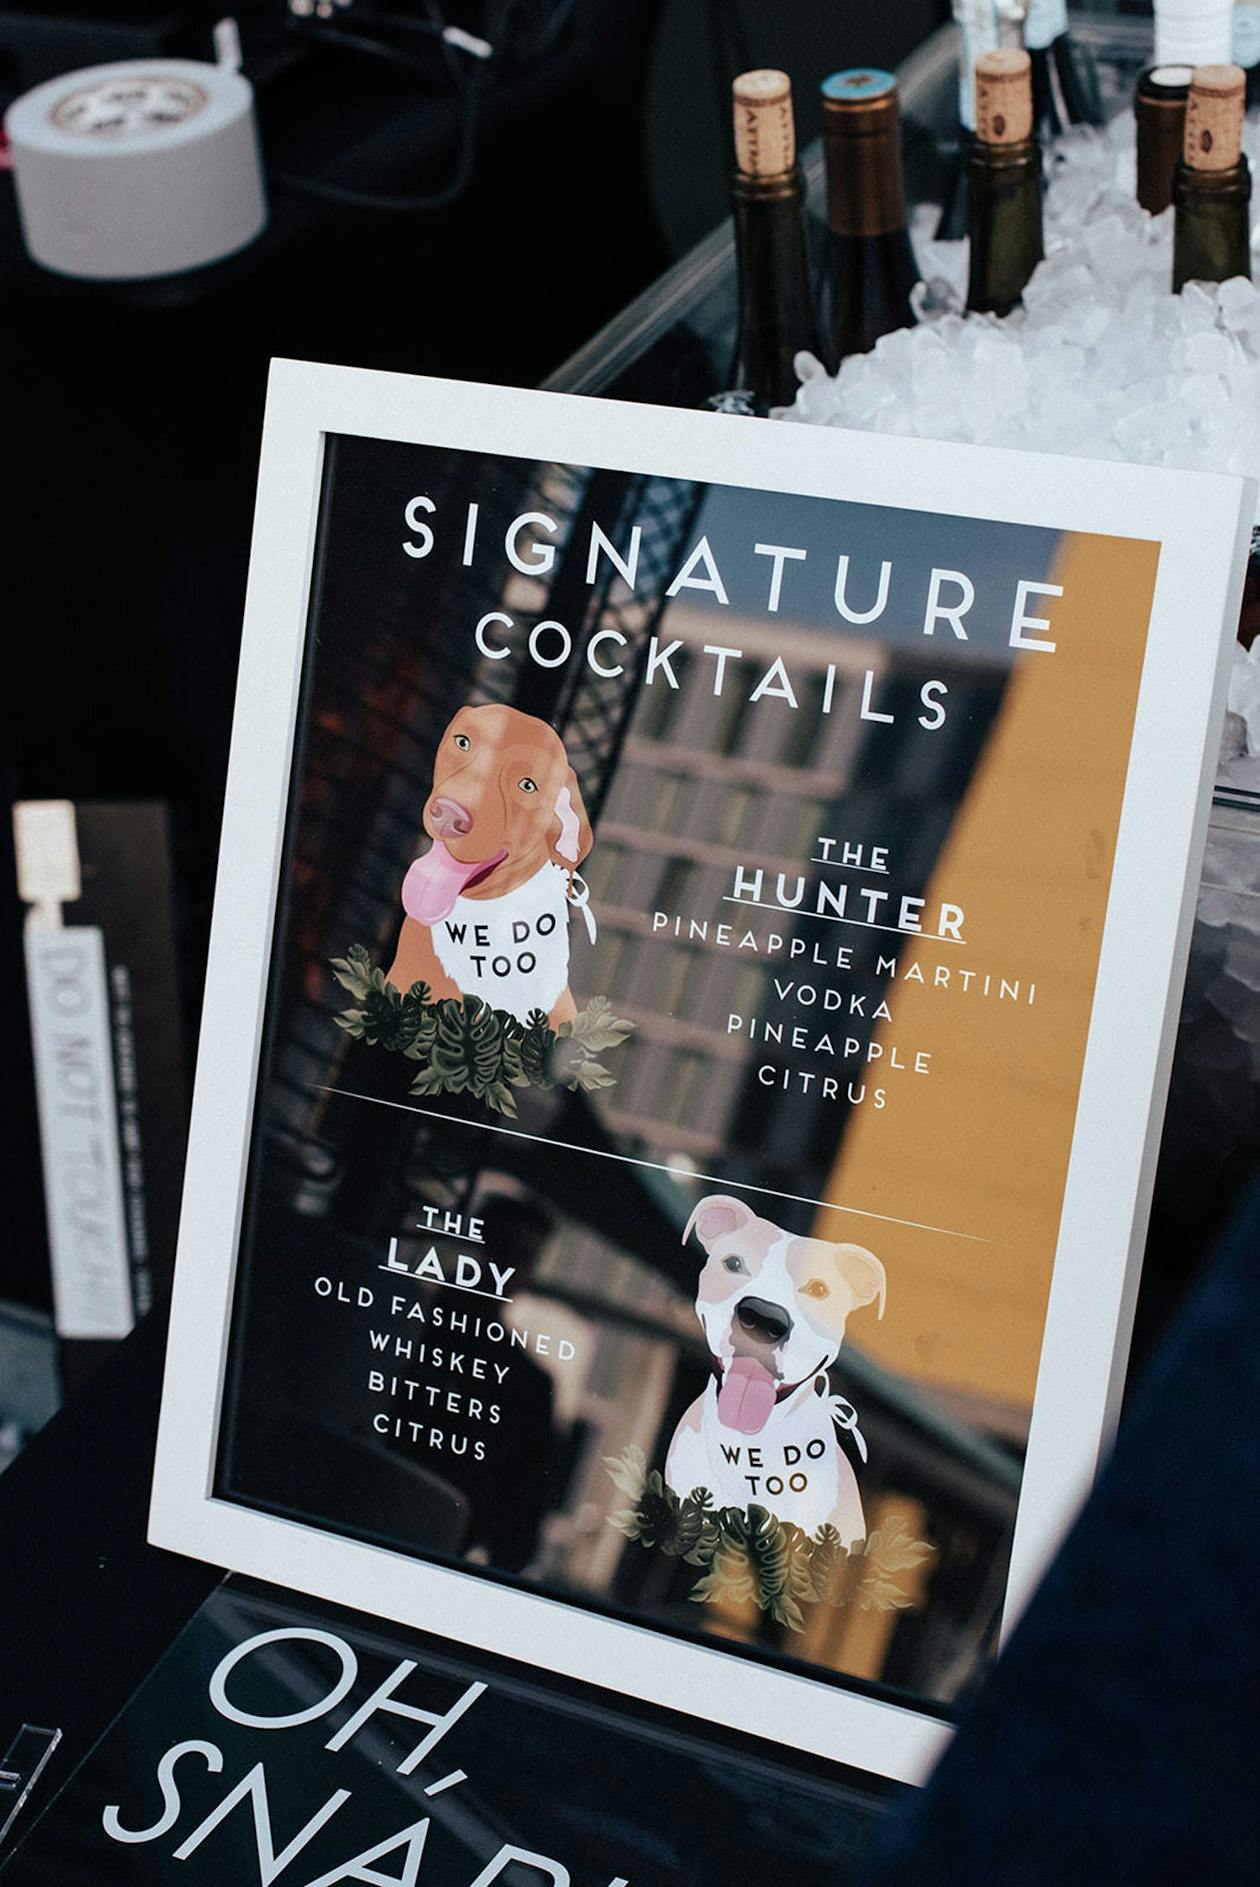 wedding cocktail menu sign with drawings of two dogs | PartySlate